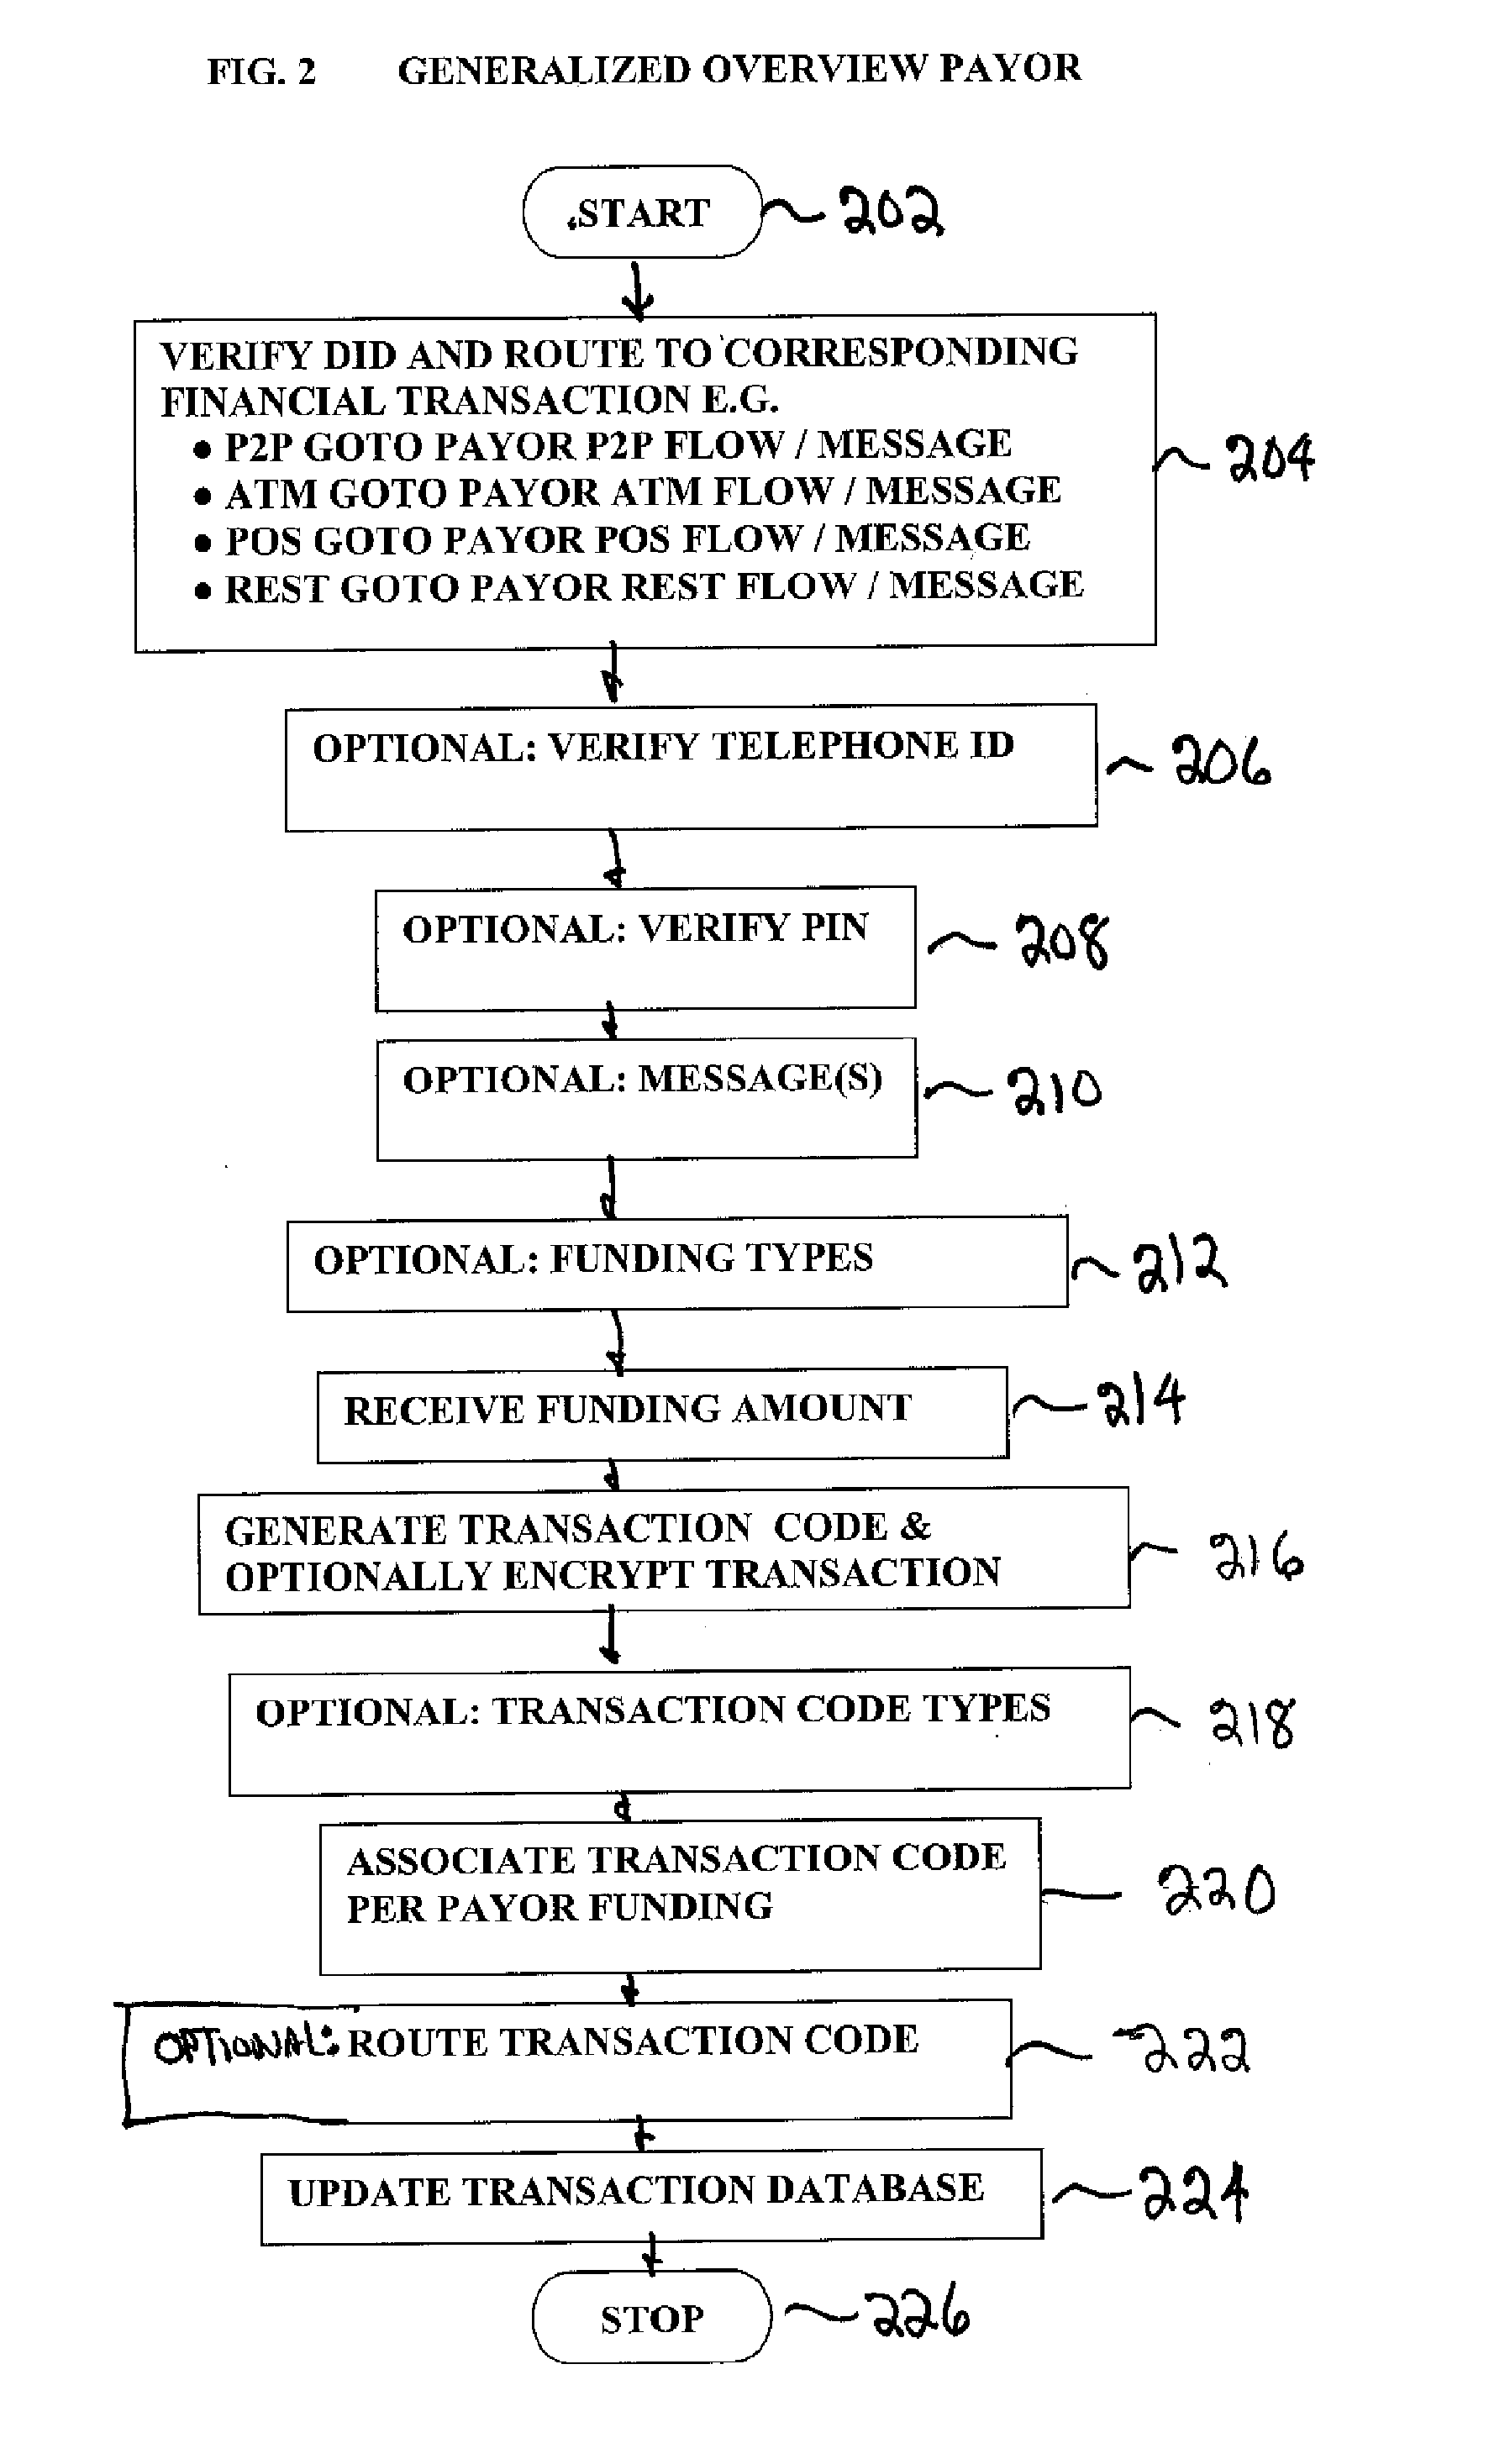 Financial transactions using a communication device